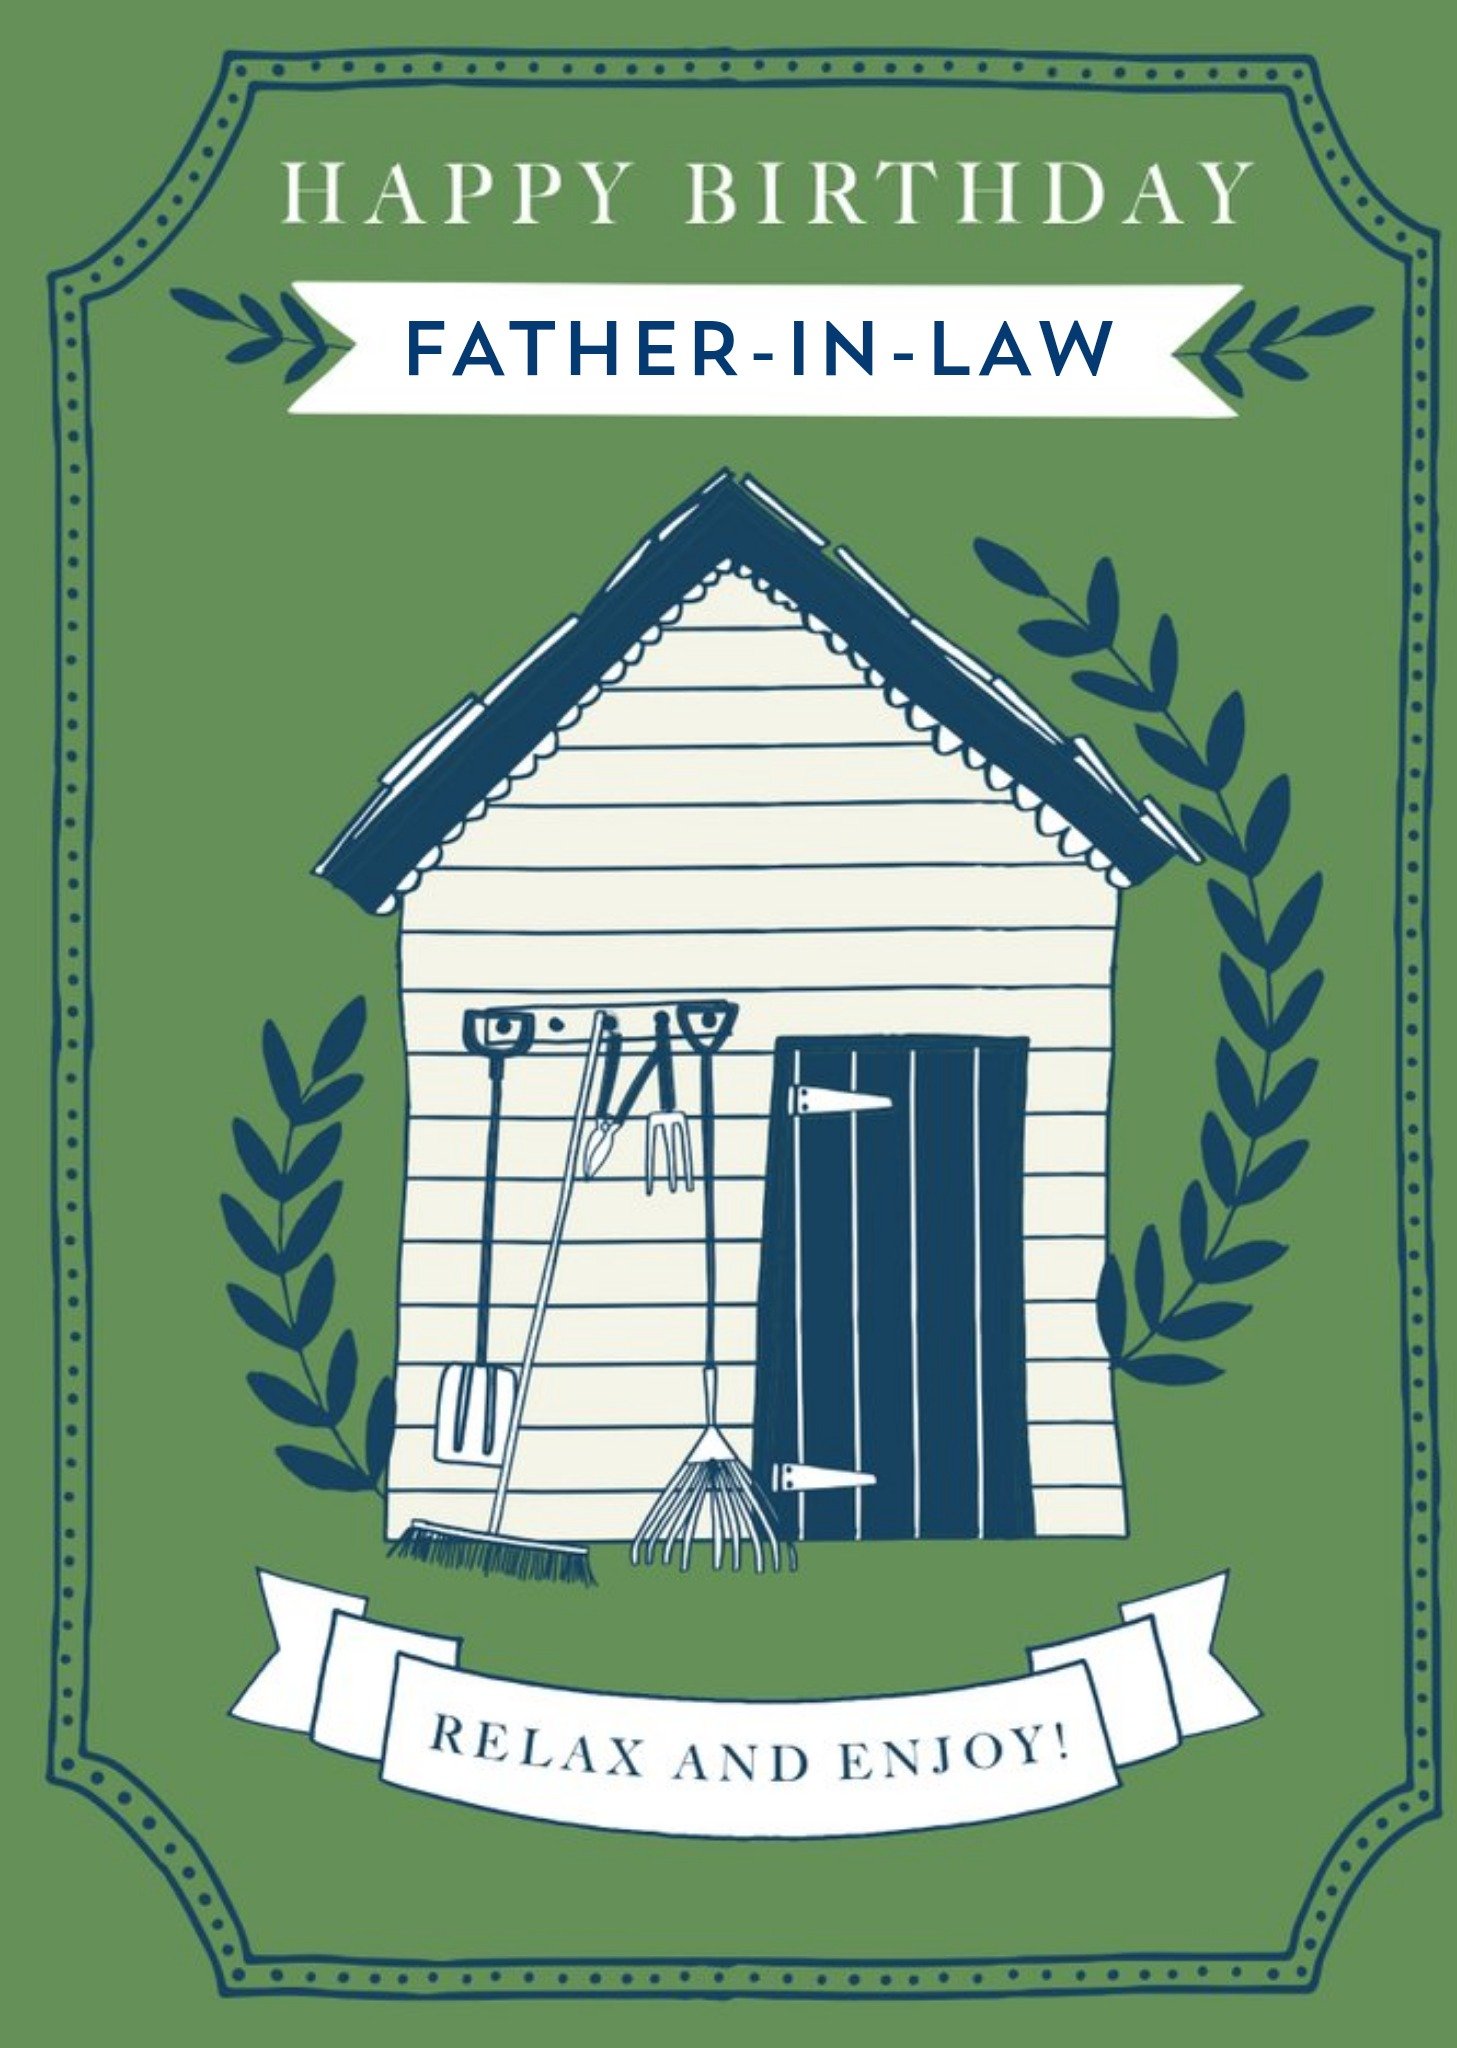 Moonpig Birthday Card - Garden Shed - Father-In-Law, Large